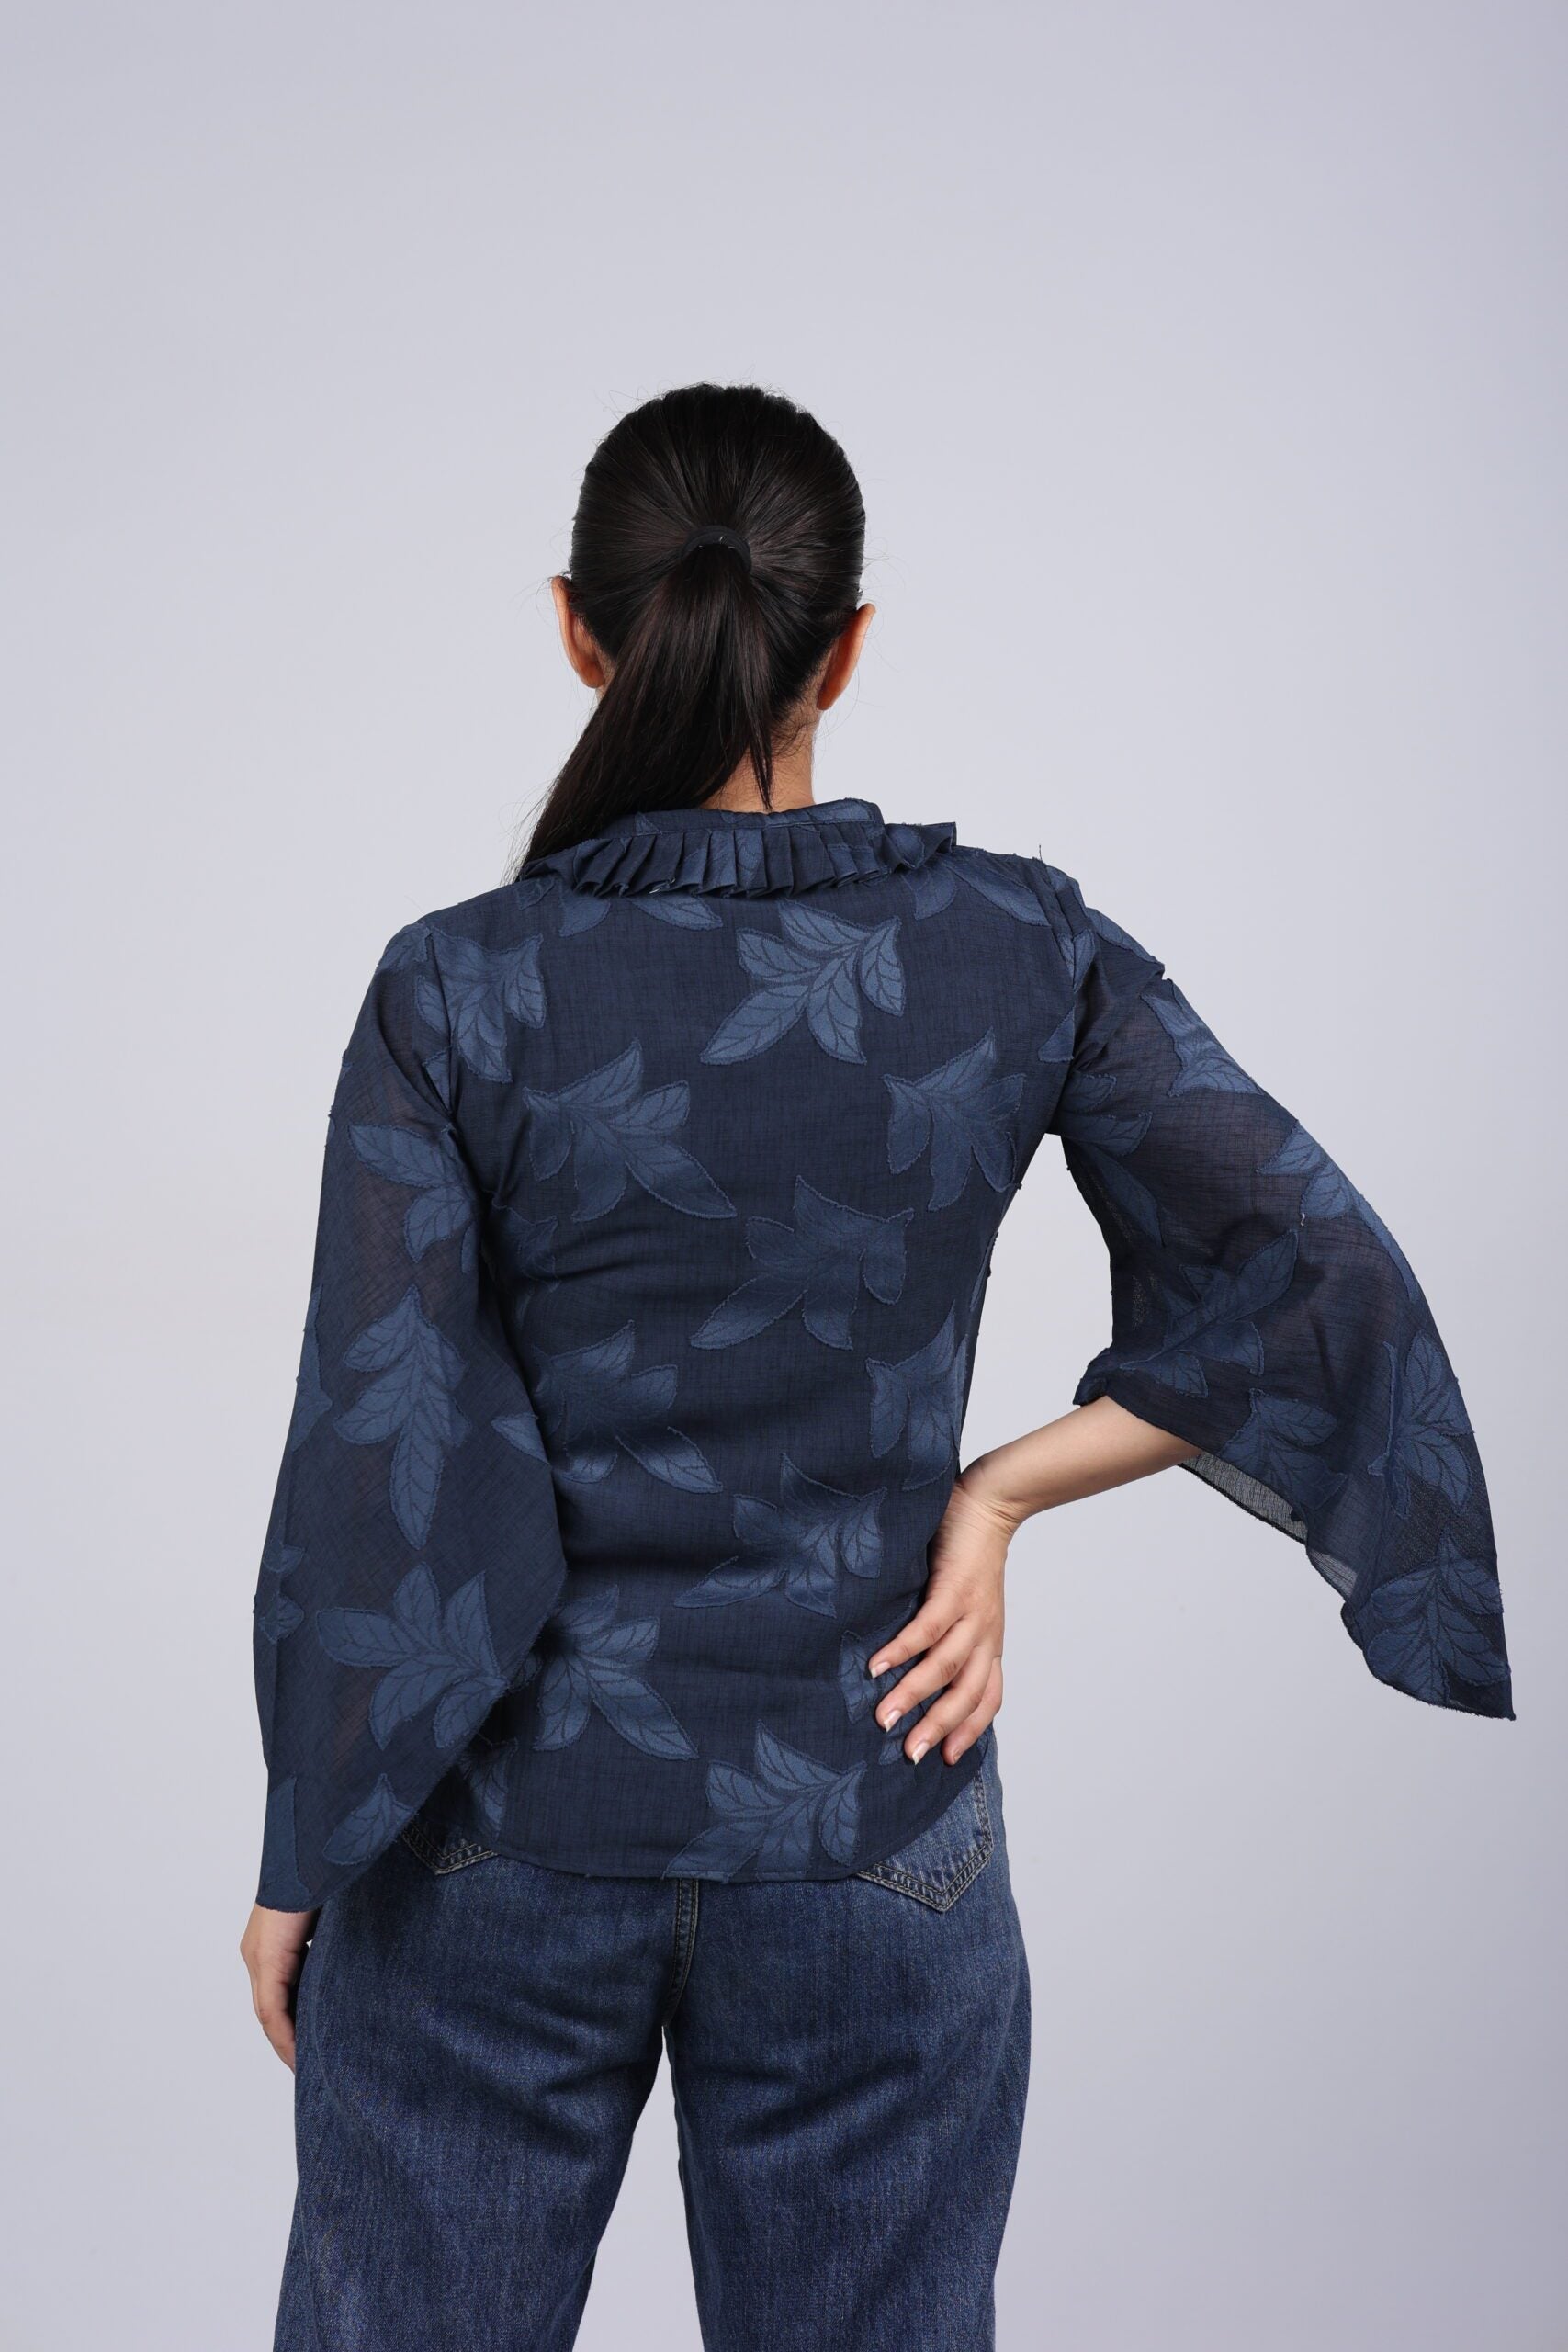 Engraved Leaf Front Knot Top (Navy Blue) A Stylish Harmony of Comfort and Nature-Inspired Elegance!